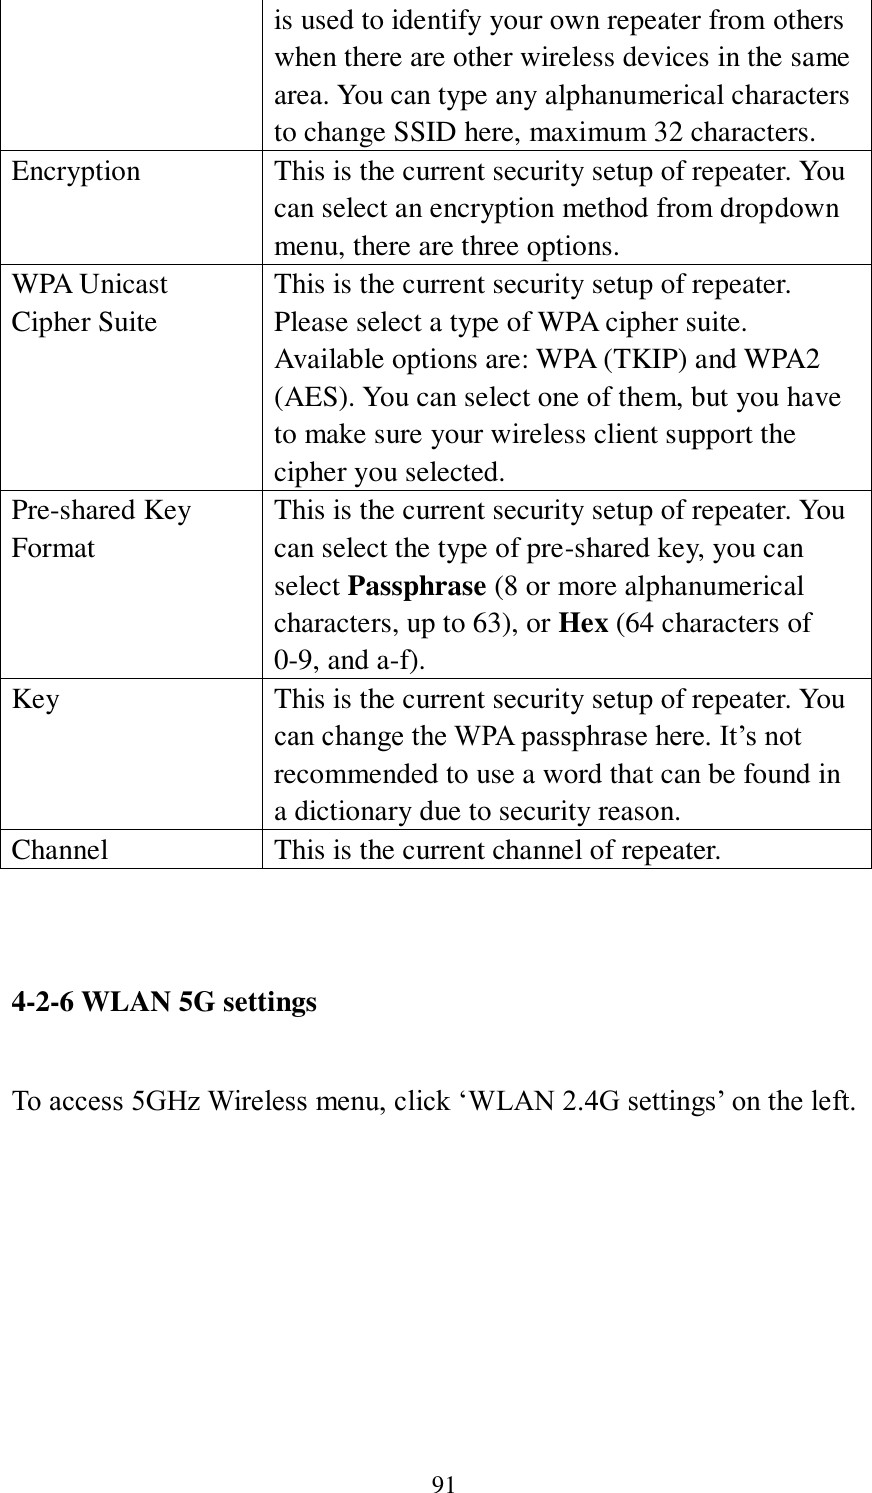 91 is used to identify your own repeater from others when there are other wireless devices in the same area. You can type any alphanumerical characters to change SSID here, maximum 32 characters. Encryption This is the current security setup of repeater. You can select an encryption method from dropdown menu, there are three options. WPA Unicast Cipher Suite This is the current security setup of repeater. Please select a type of WPA cipher suite. Available options are: WPA (TKIP) and WPA2 (AES). You can select one of them, but you have to make sure your wireless client support the cipher you selected. Pre-shared Key Format This is the current security setup of repeater. You can select the type of pre-shared key, you can select Passphrase (8 or more alphanumerical characters, up to 63), or Hex (64 characters of 0-9, and a-f). Key This is the current security setup of repeater. You can change the WPA passphrase here. It’s not recommended to use a word that can be found in a dictionary due to security reason. Channel This is the current channel of repeater.      4-2-6 WLAN 5G settings  To access 5GHz Wireless menu, click ‘WLAN 2.4G settings’ on the left.  